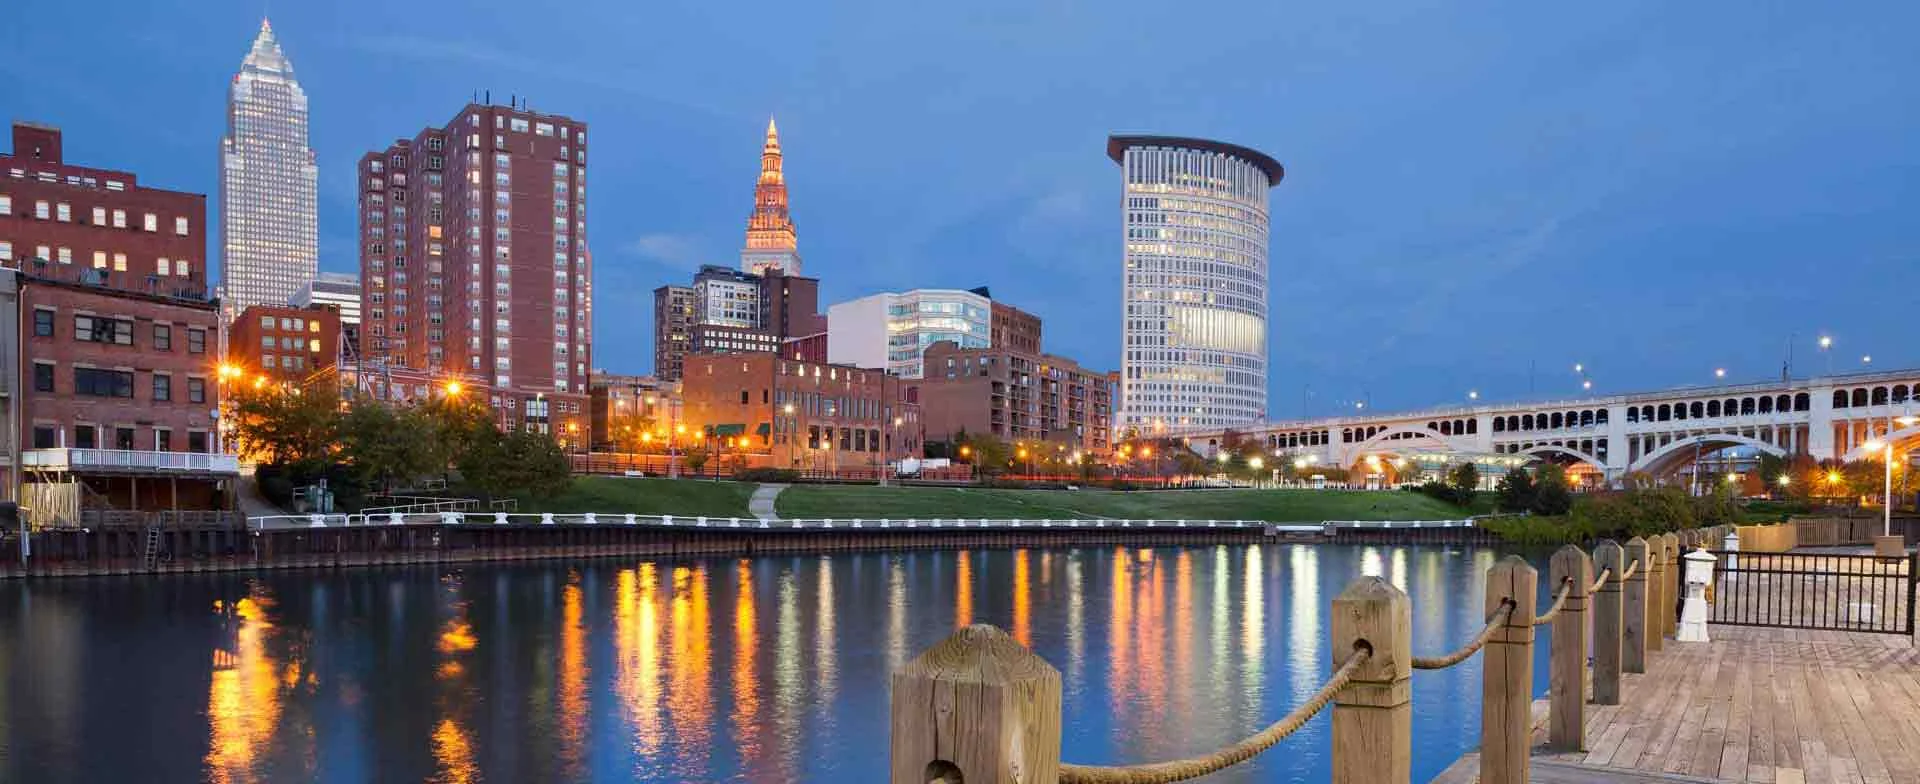 Cleveland skyline with a doc and river front